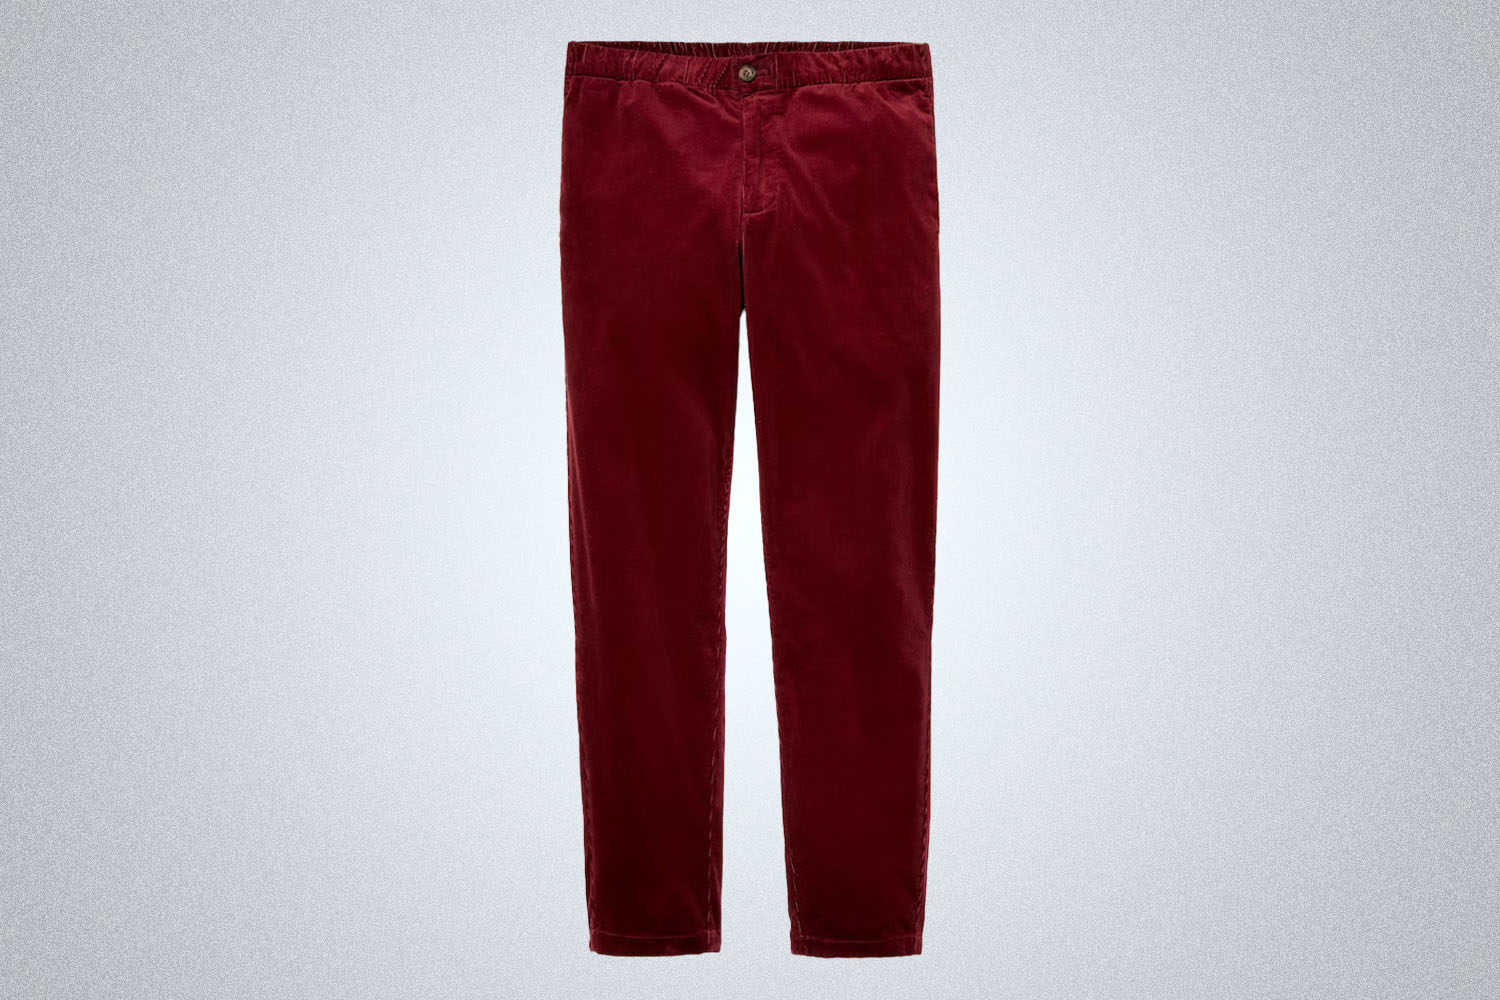 a pair of red Bonobos corduroy pants on a grey background